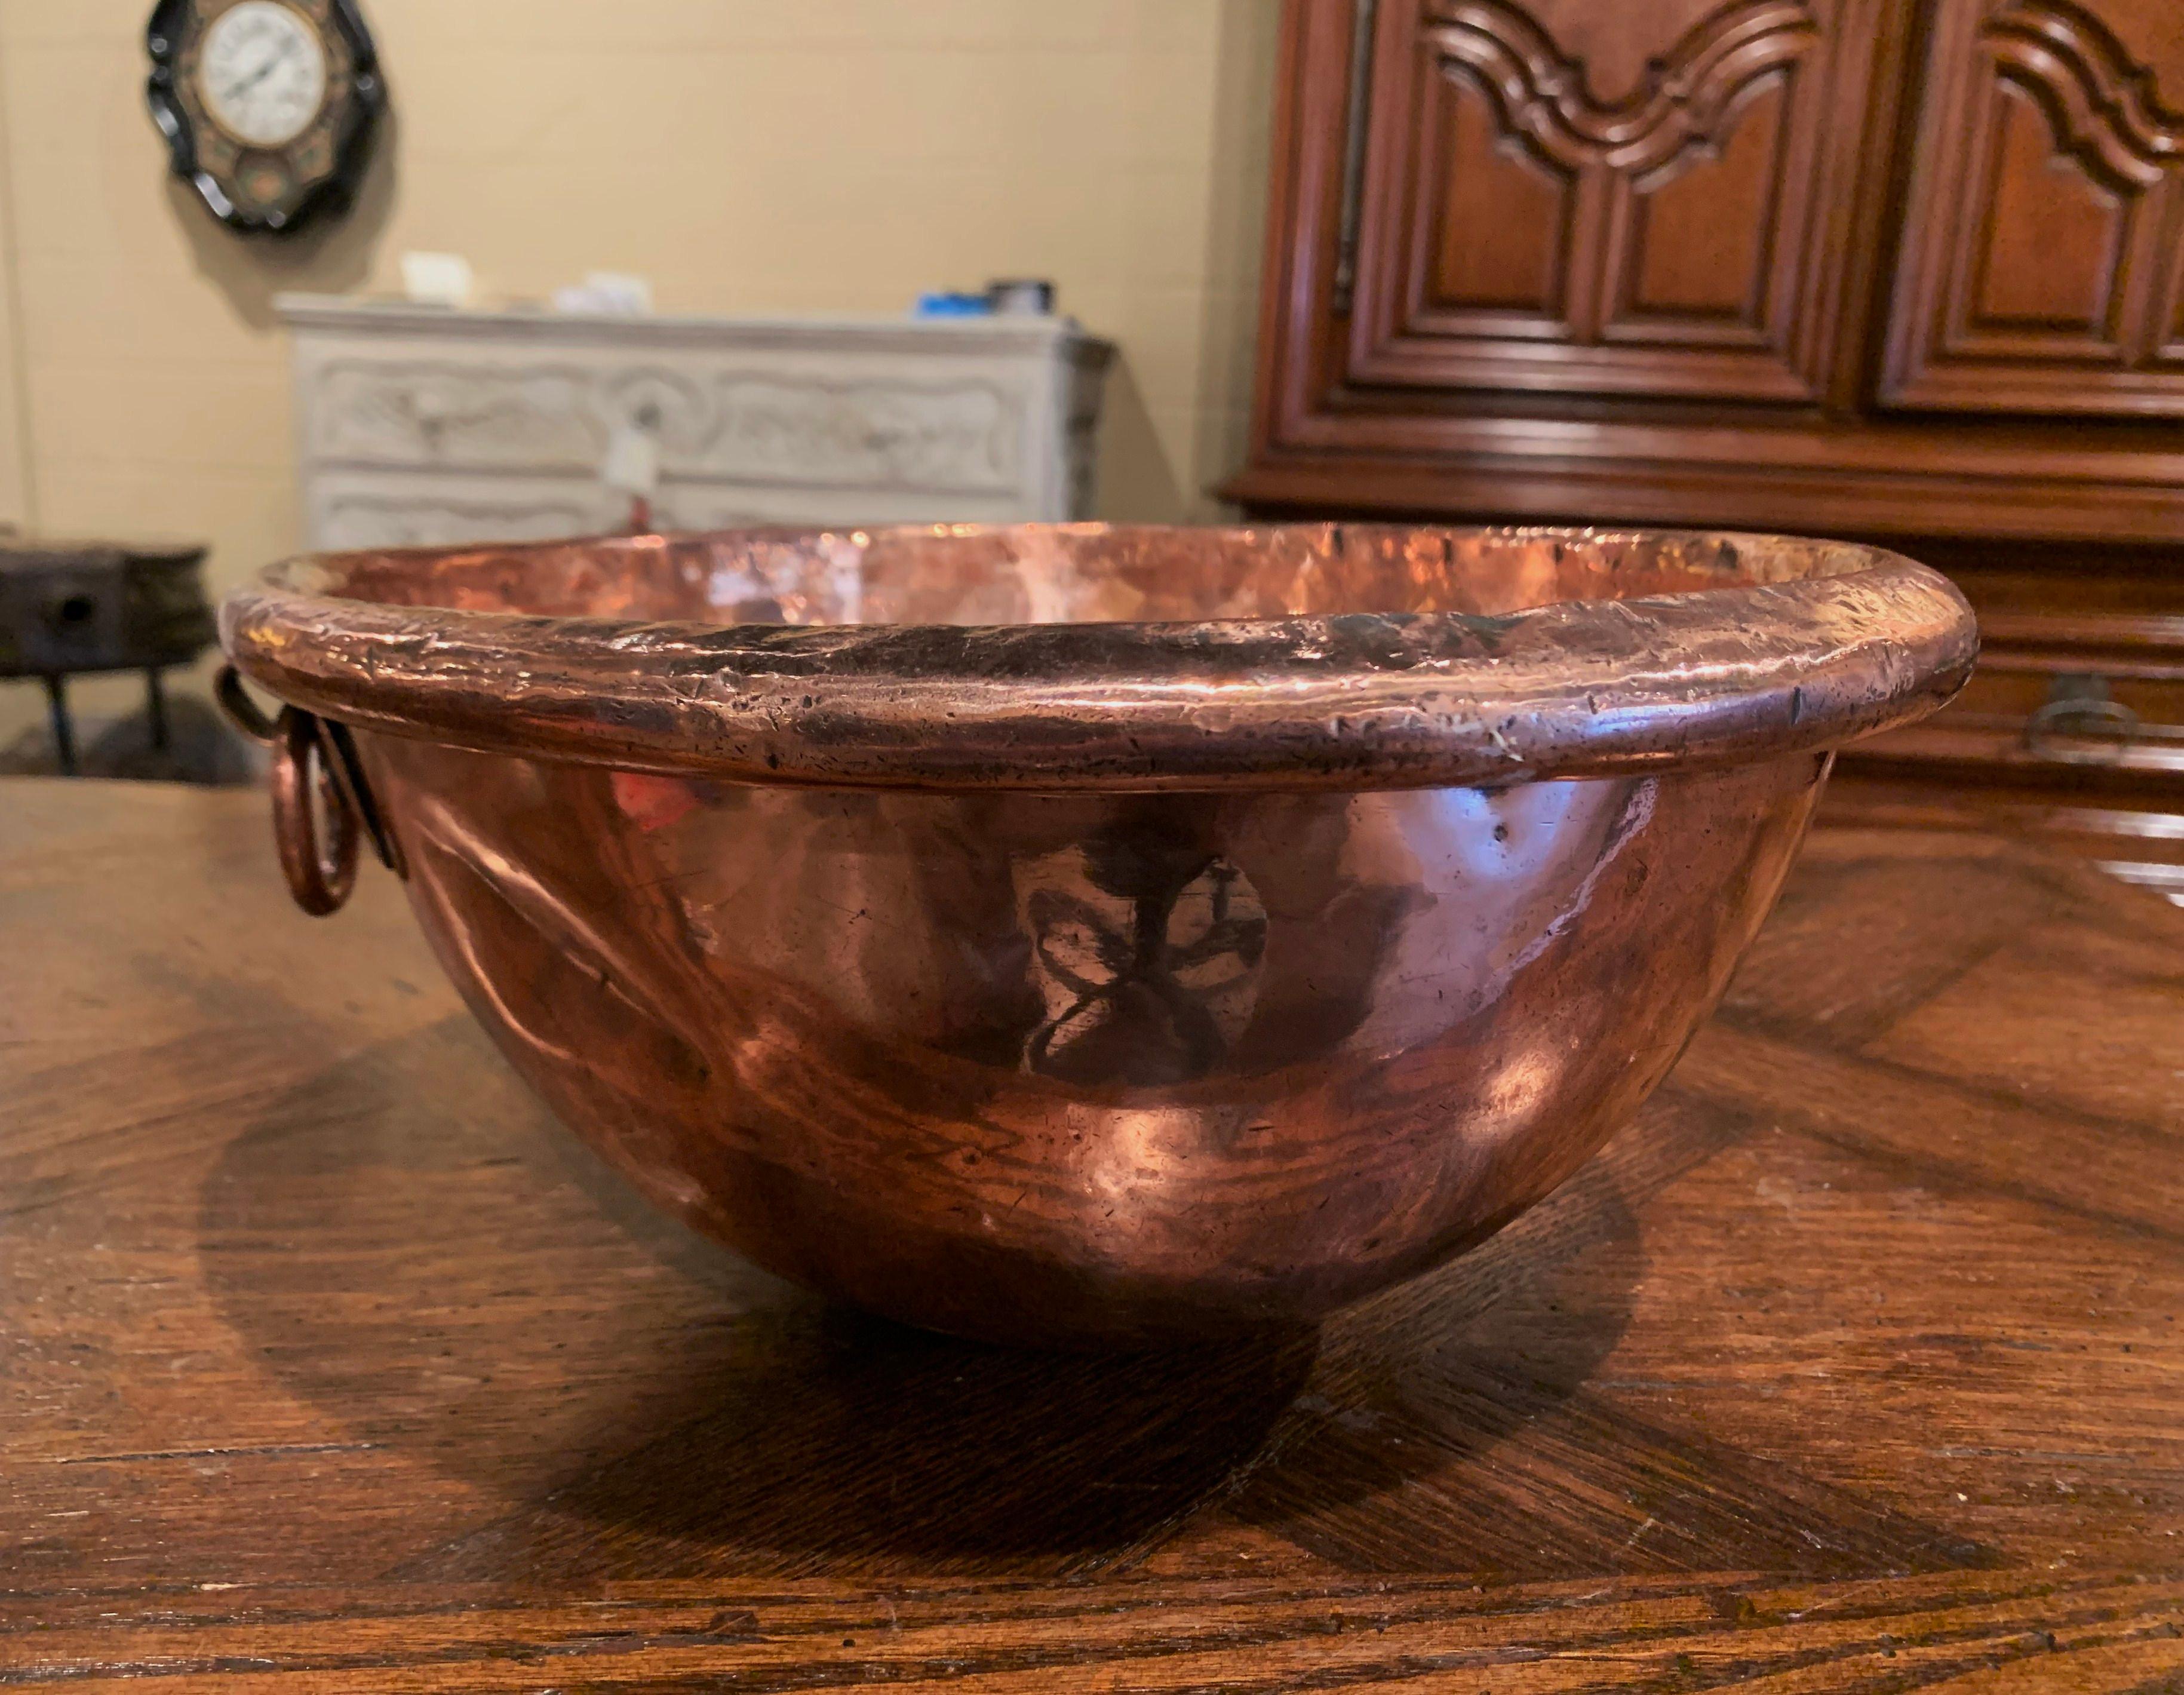 Keep your wine chilled in style with this elegant round bowl, crafted in Northern France circa 1780 and originally used for home made jelly, the circular copper bowl with rounded rim and a small round side handle attached with rivets. The dish is in